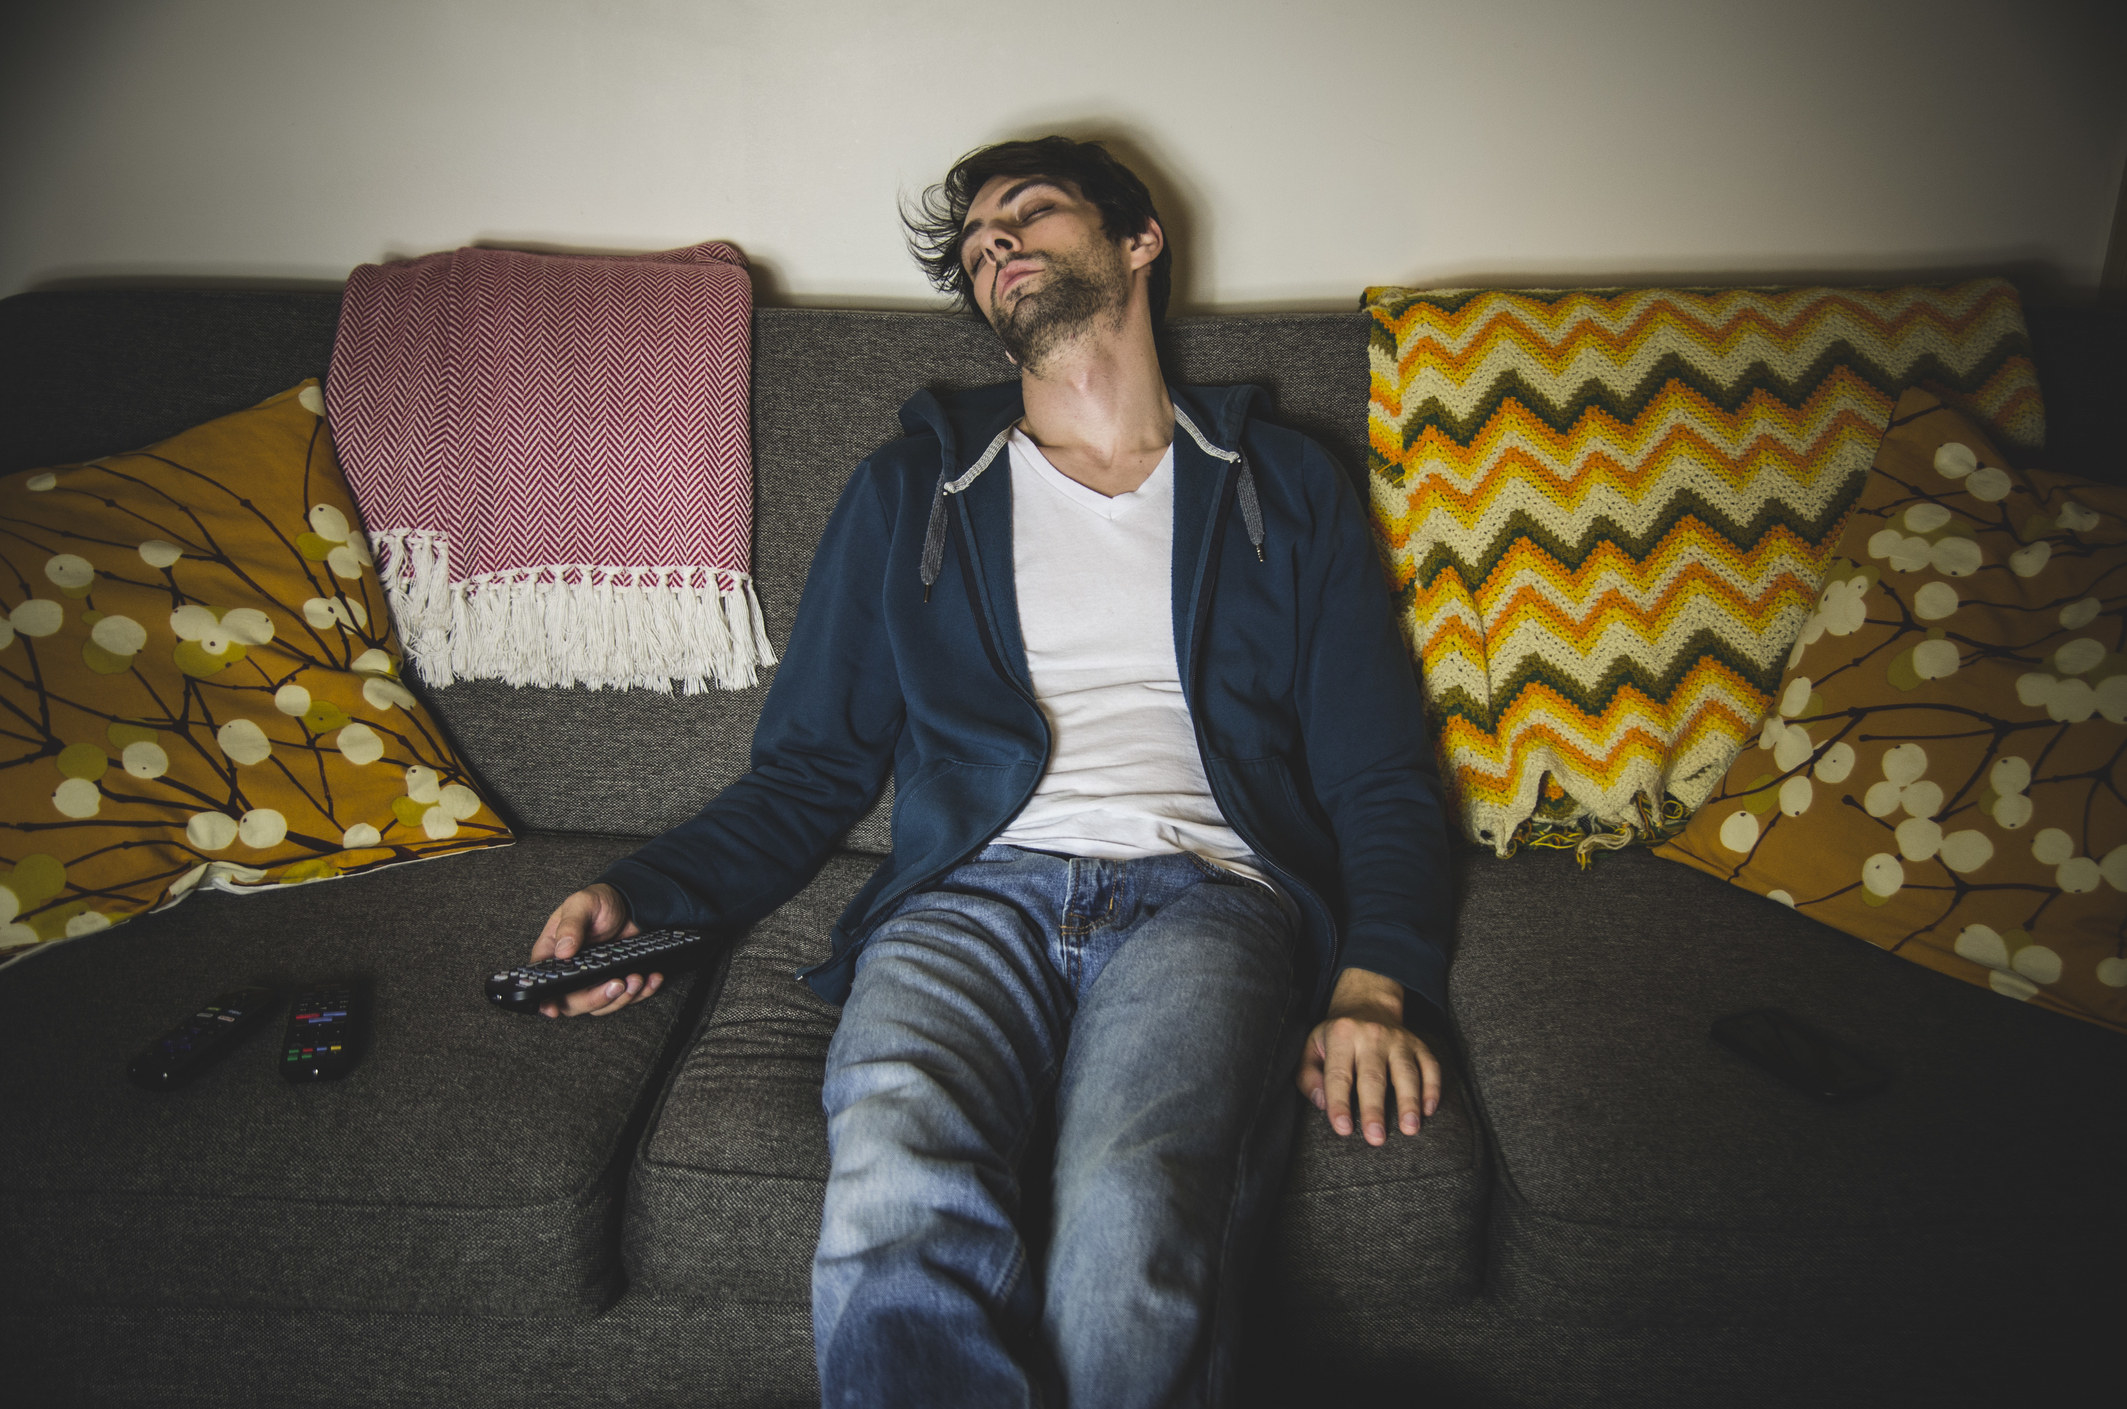 A man sleeping on the couch with the television remote in his hand